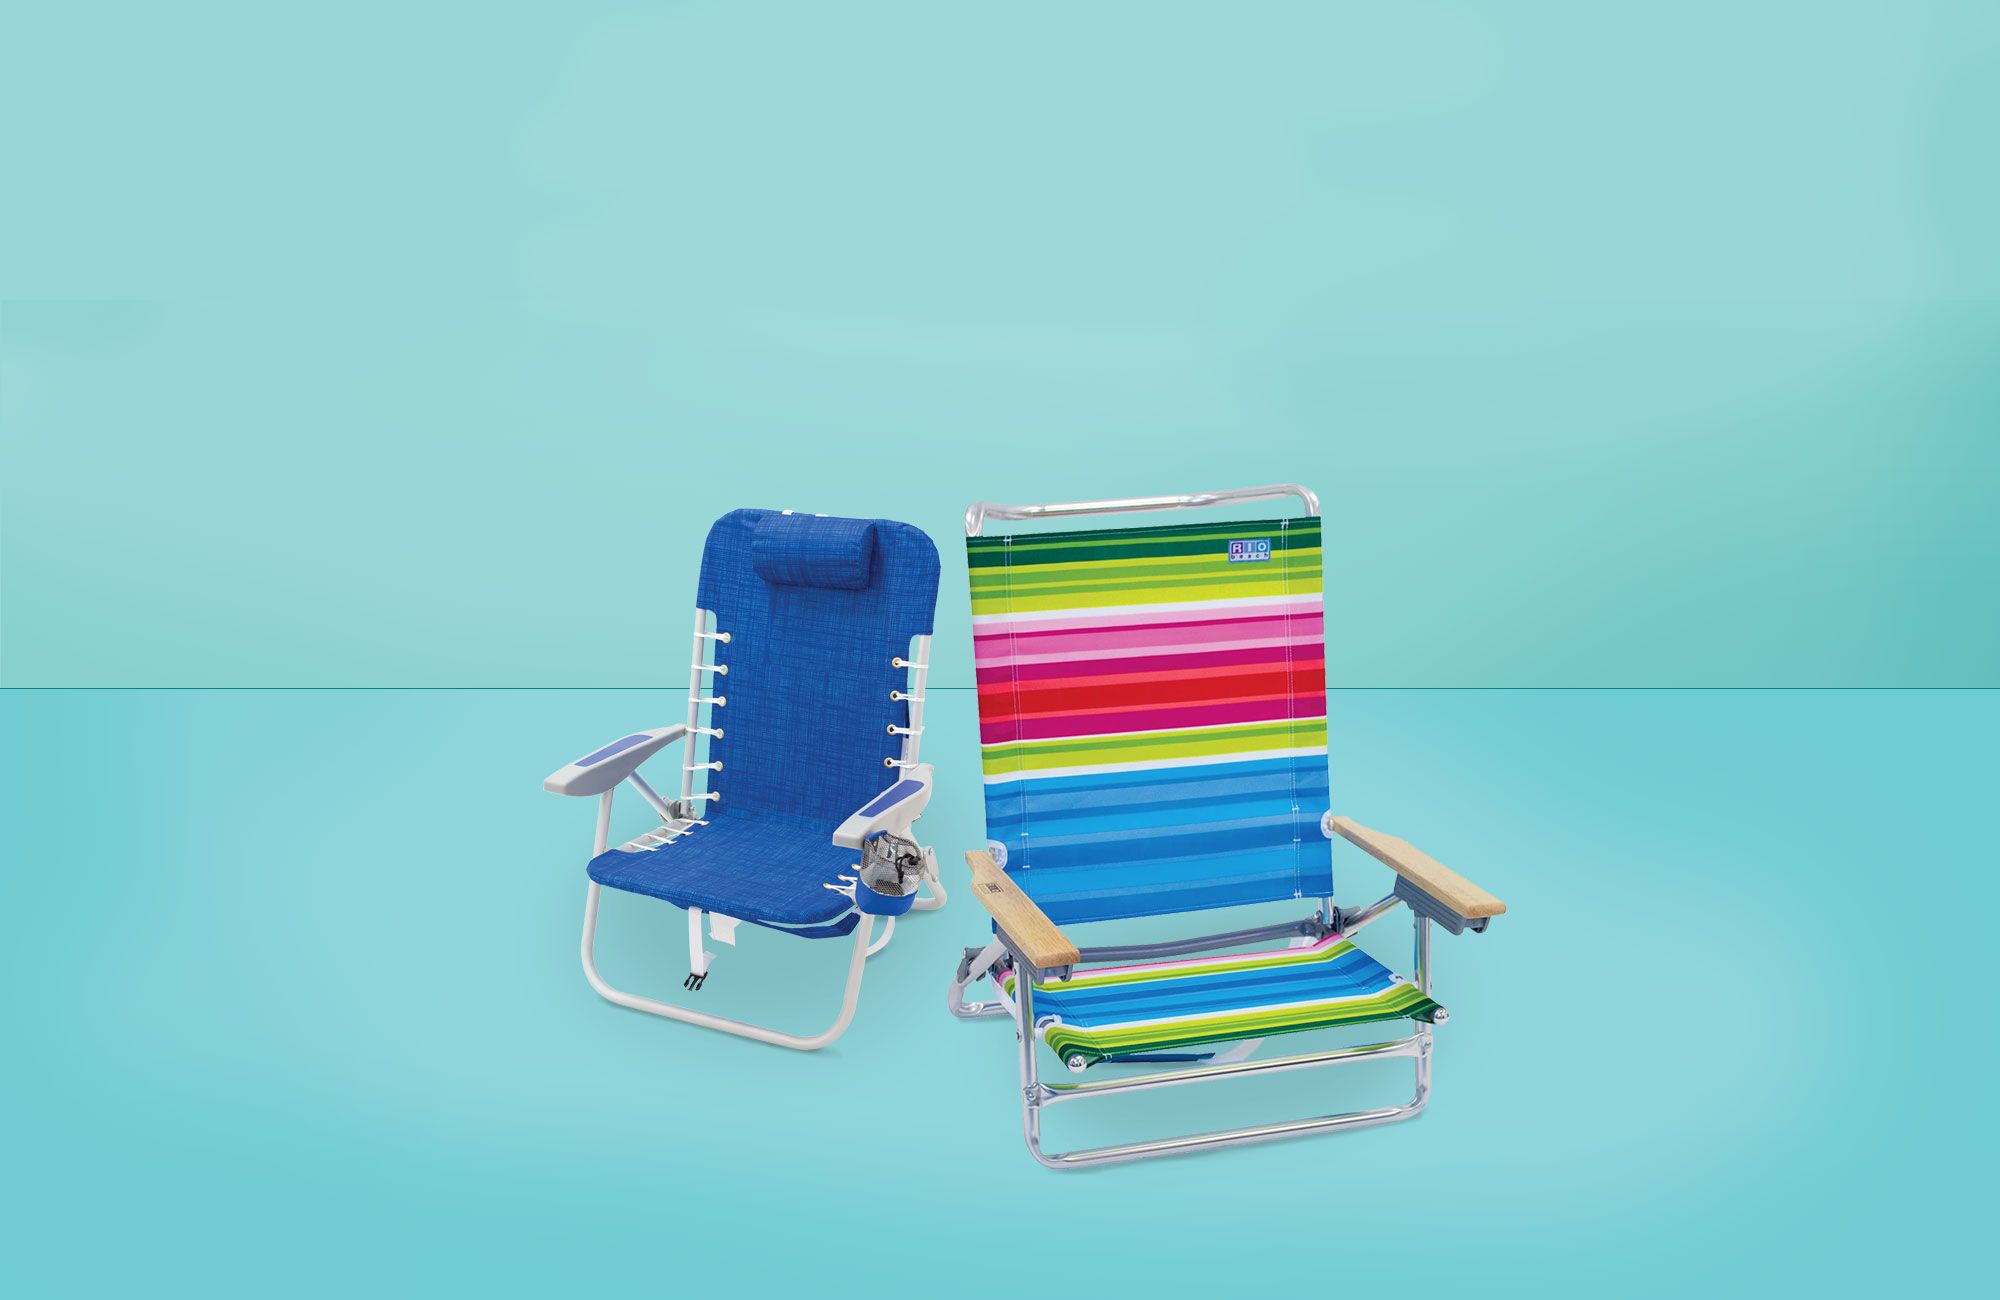 10 Best Beach Chairs 2020 – Reviews of 